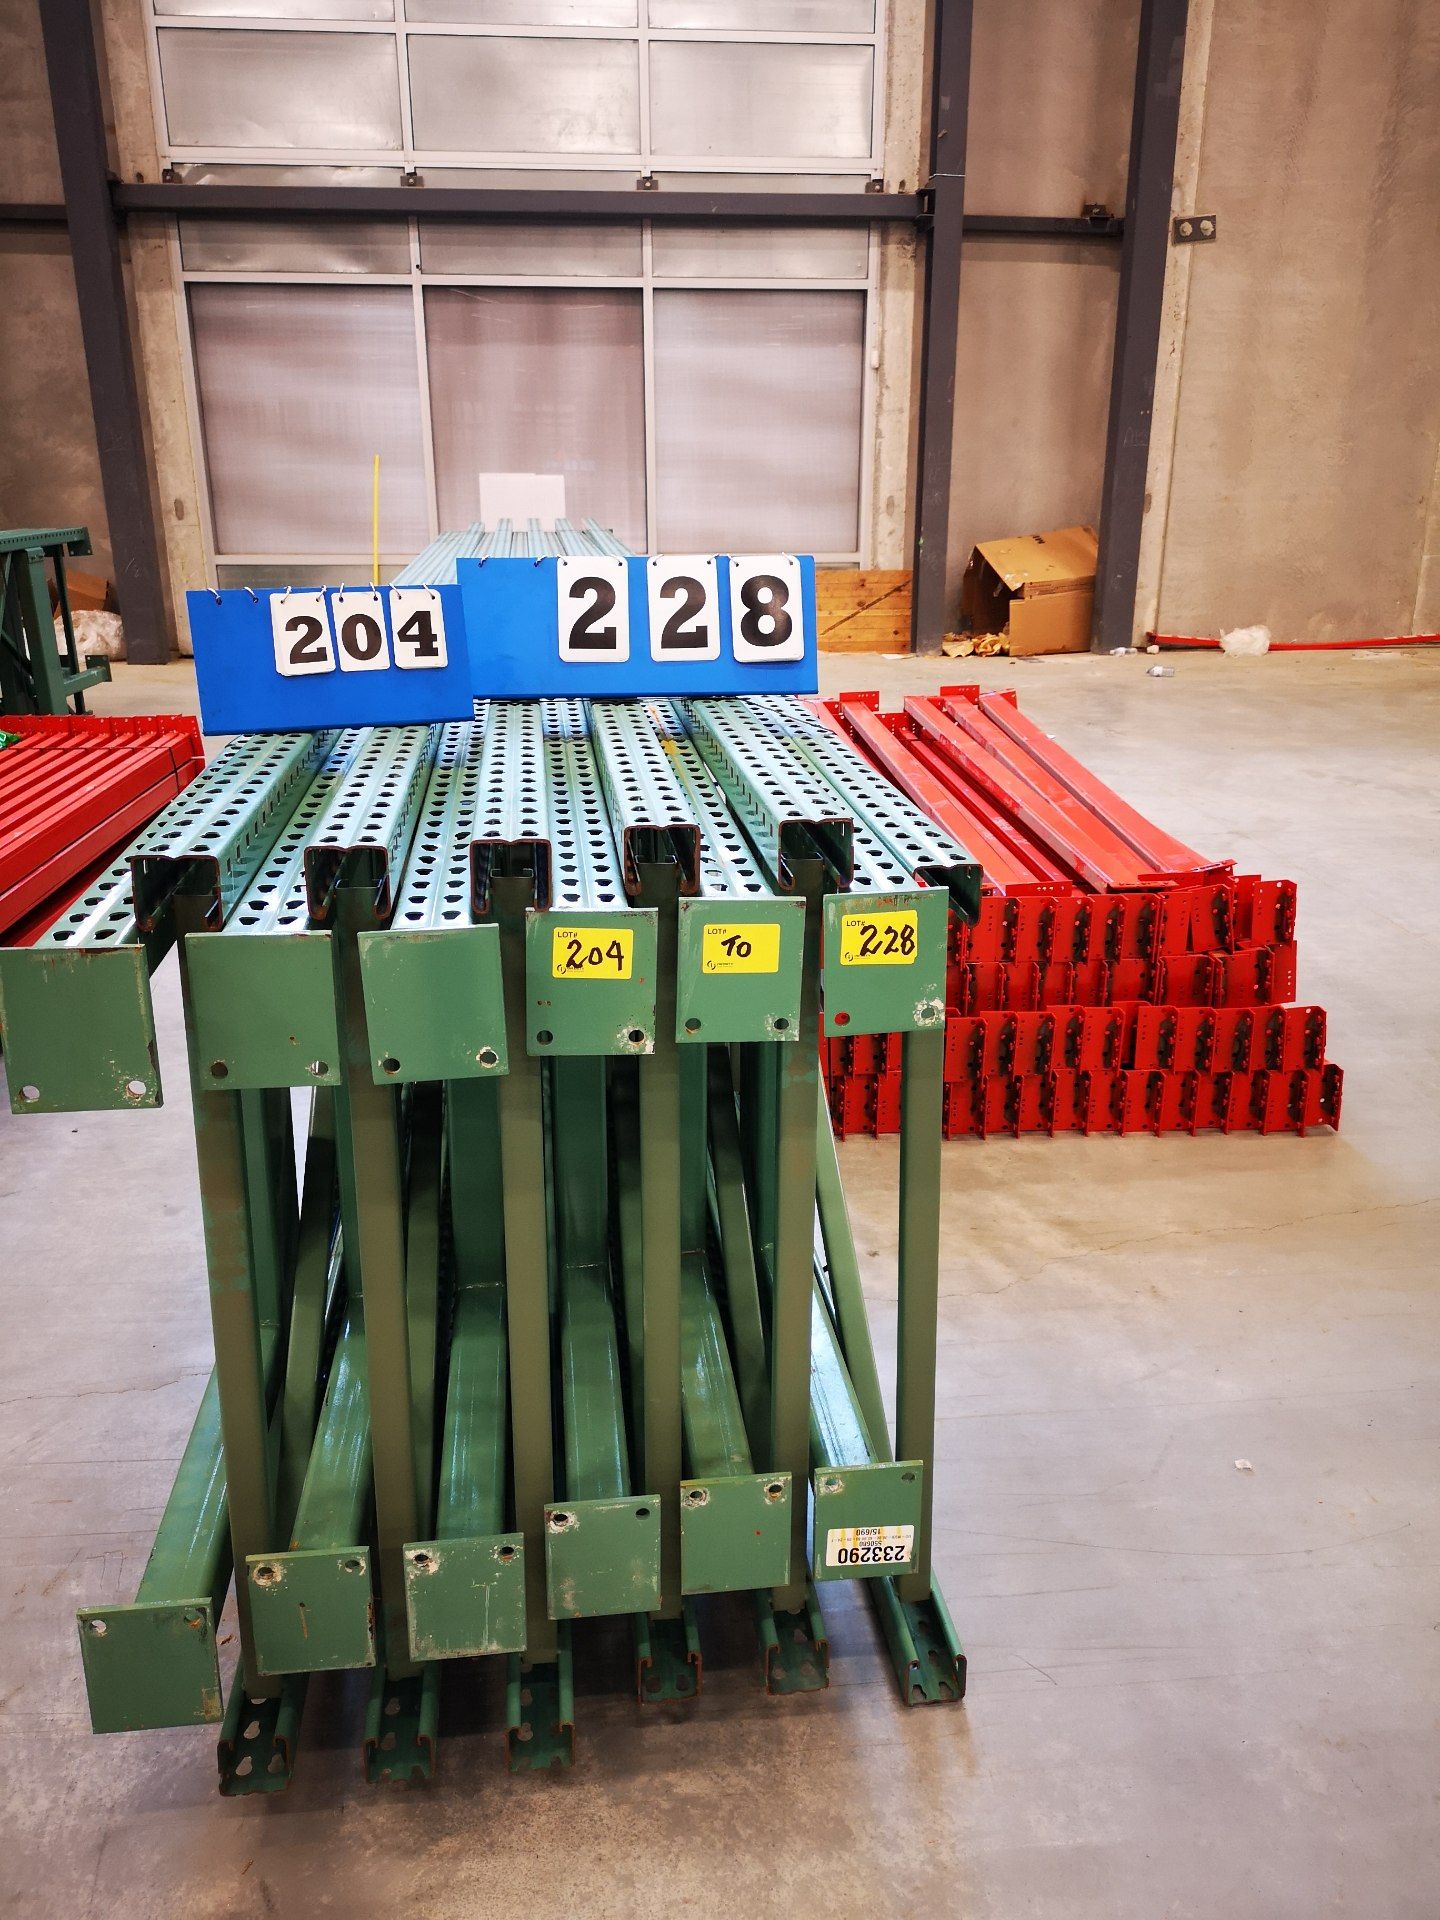 SECTIONS OF RIDG-U-RACK INTERLAKE CANTILEG INDUSTRIAL PALLET RACKING CONSISTING OF: (12) 42D" X 24'H